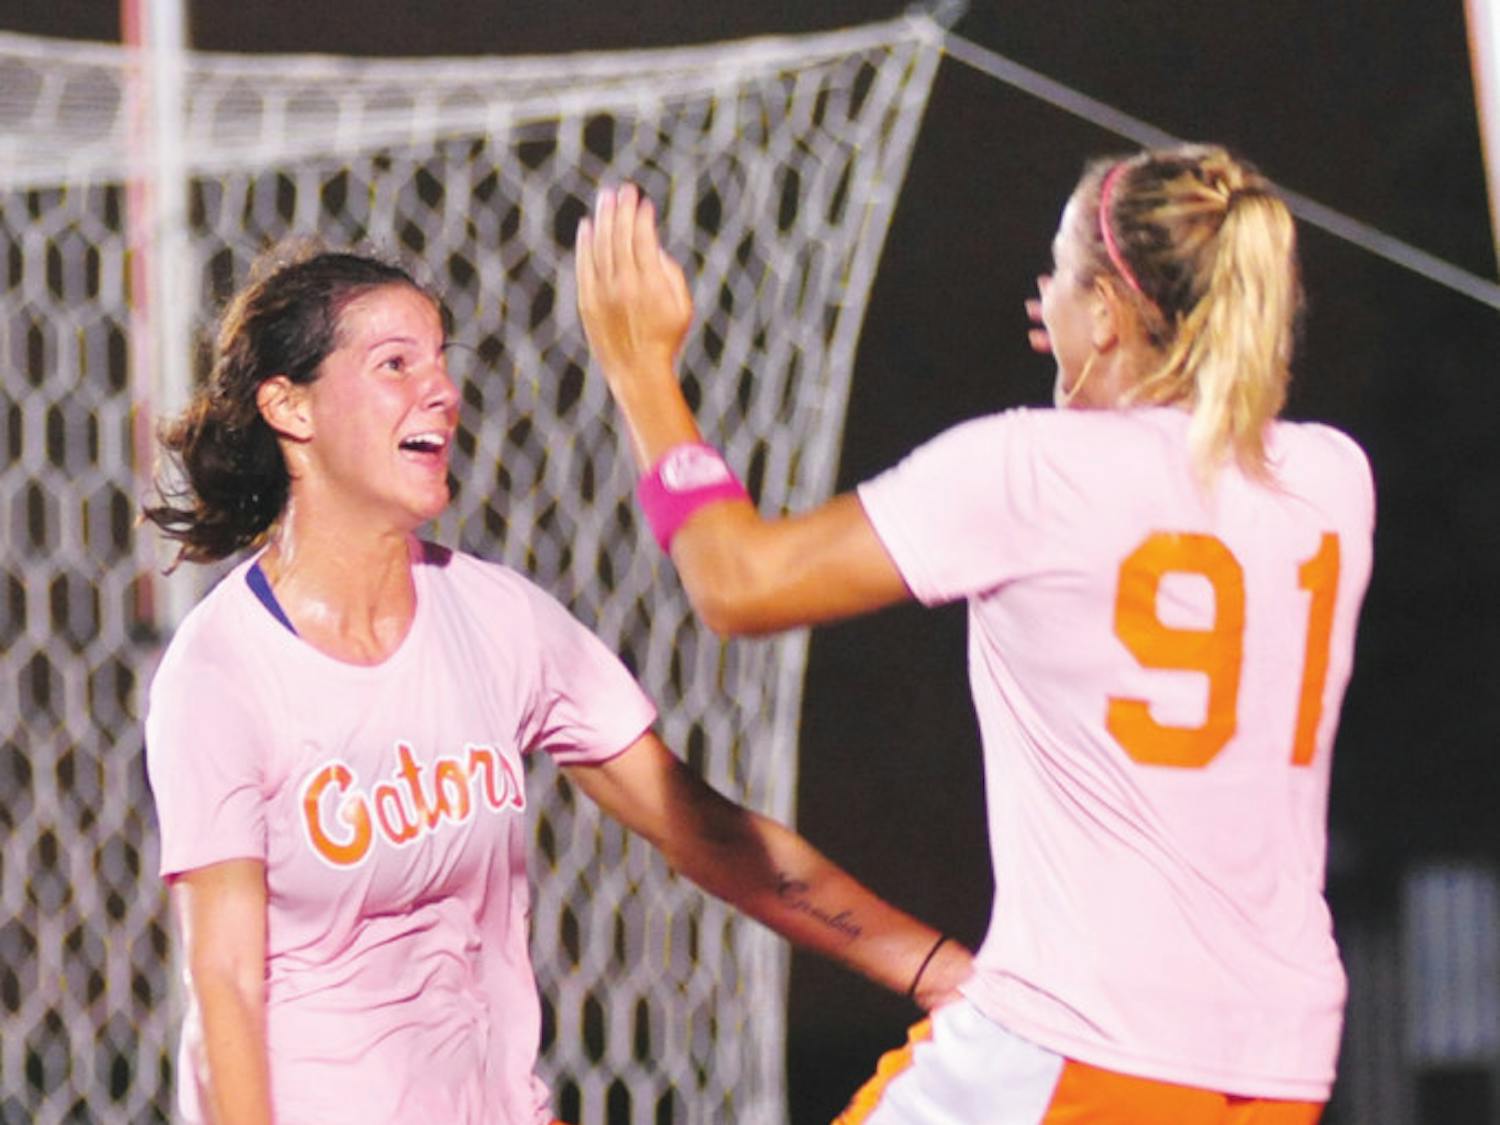 Senior Jo Dragotta (left) celebrates with junior Adriana Leon (right) after scoring a goal in Florida's 2-1 win against Missouri on Friday at James G. Pressly Stadium. Dragotta is tied for the team lead in goals with five.